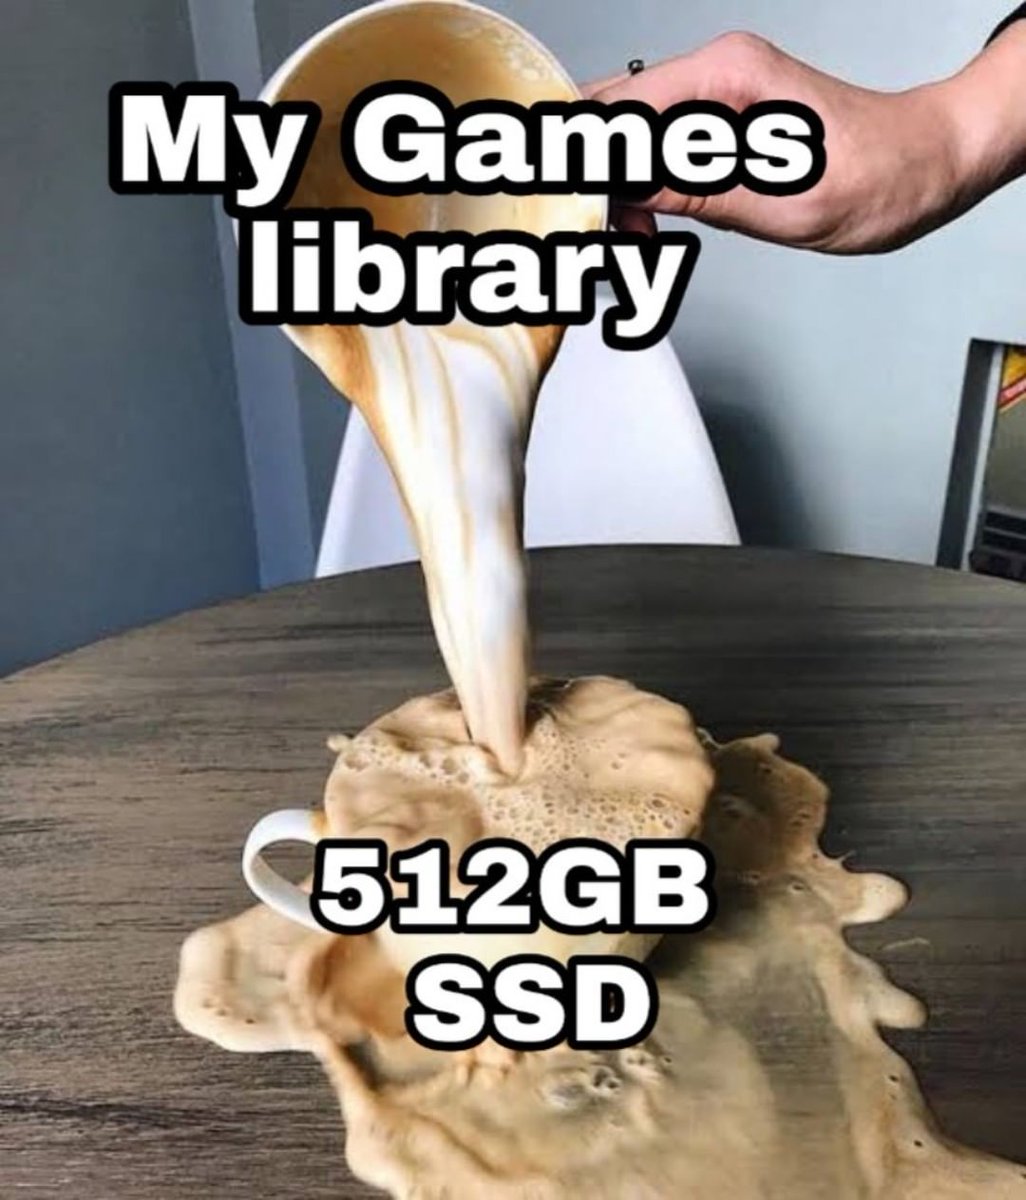 MY games library vs MY SSD

#gamingcommunity #gaming #pc #pcmr
#consolegames #gamer #gamerlife #gaminggear #gamingmeme #gamingnews #gamingpc #meme #memes #Pcmr #pcmrmeme
#GAMERS #GAMERSMEME #GAMERMEME #PCBuild #PCBuilding